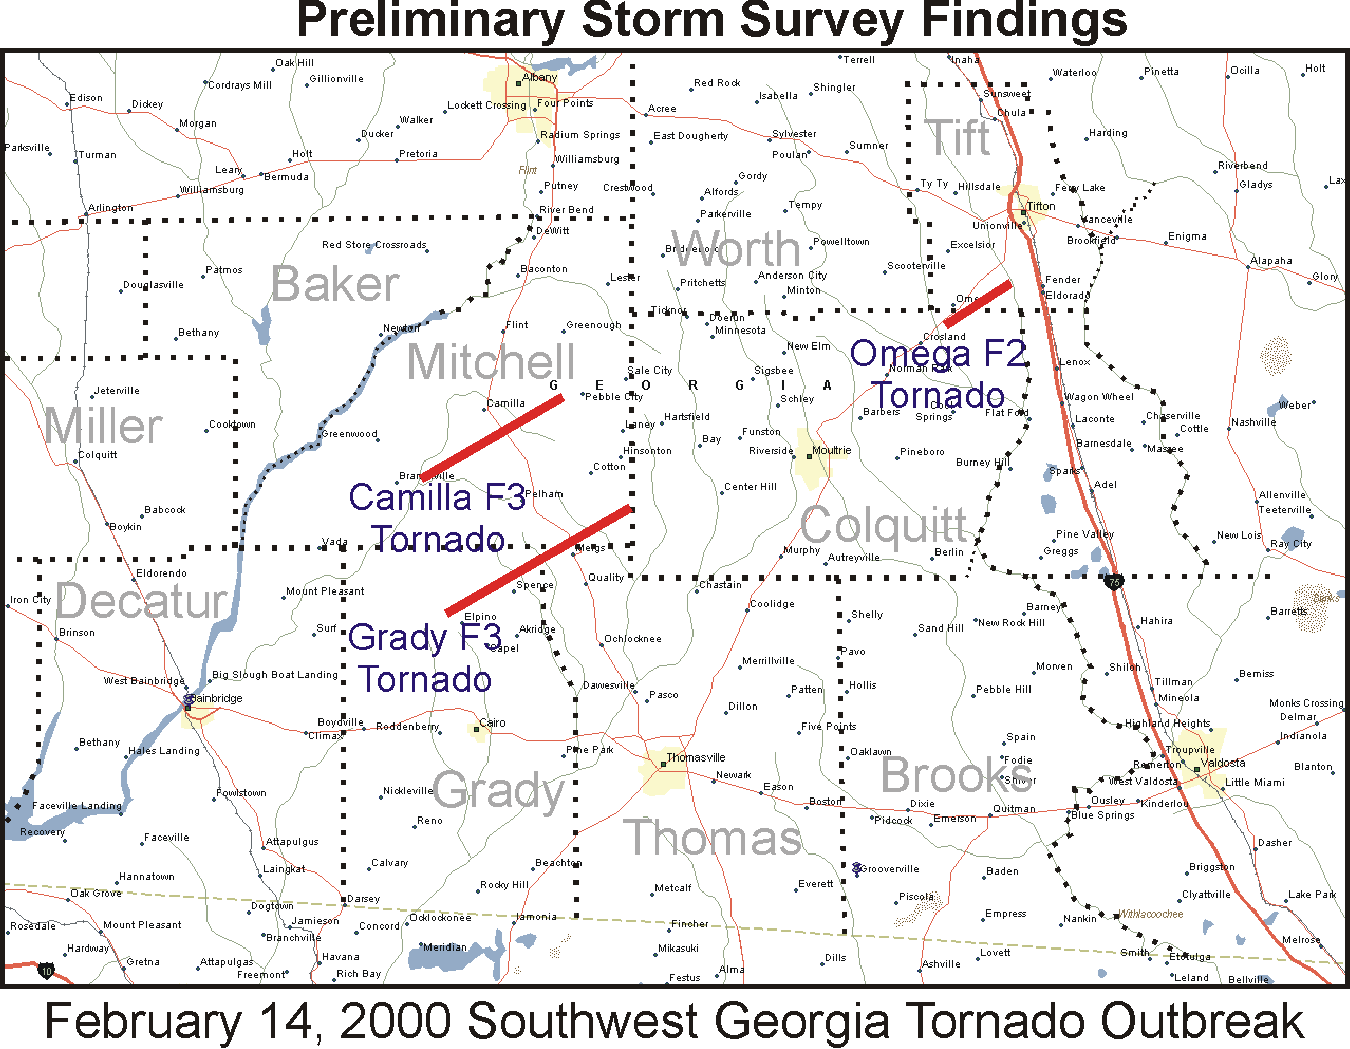 Damage paths and strengths (on the Fujita scale) of the three deadly tornadoes.